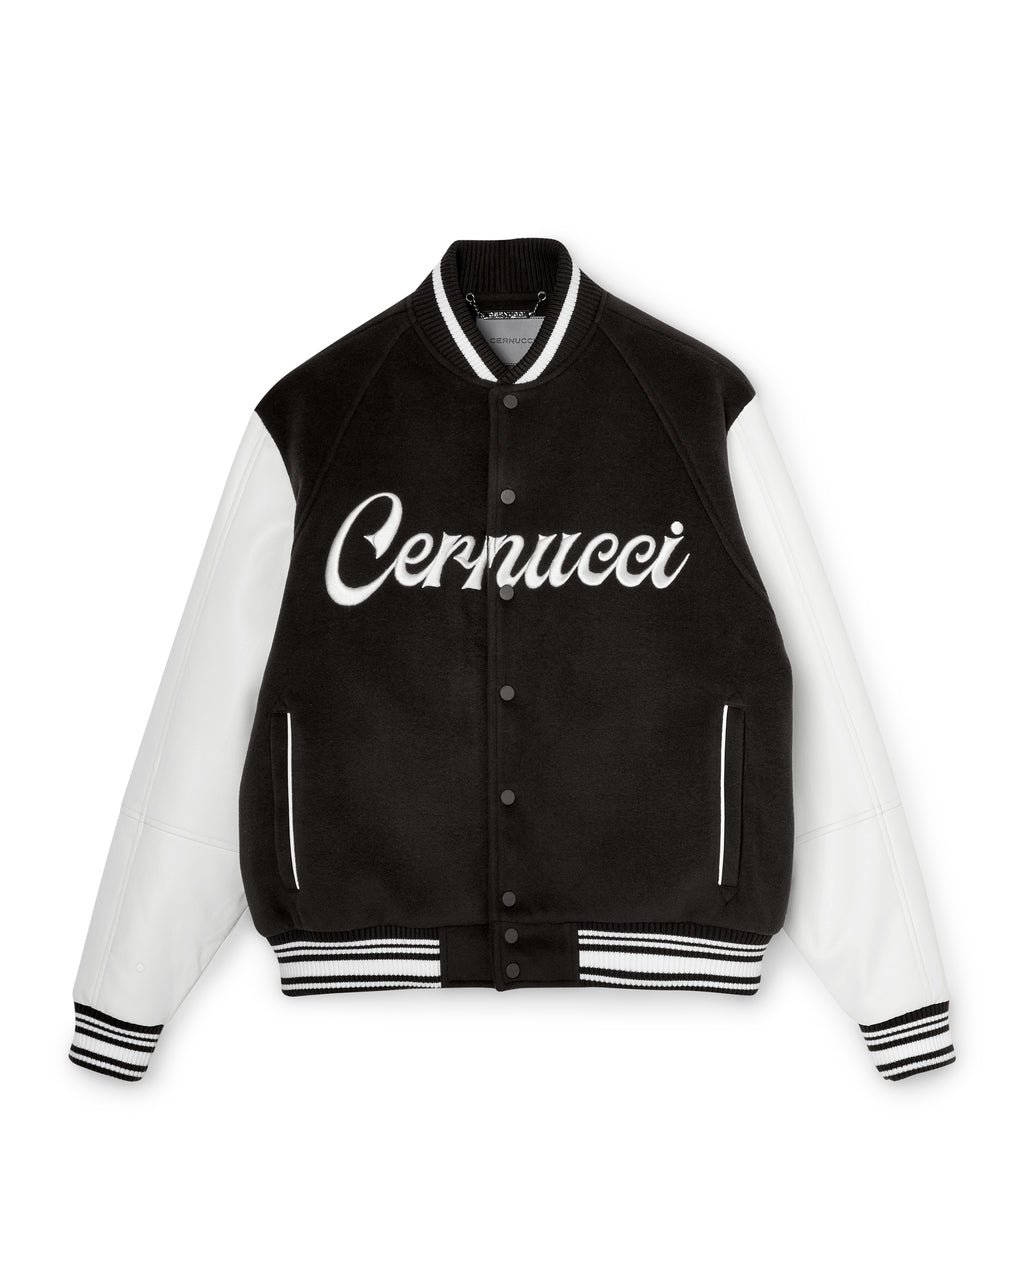 Men's Embroidered Hip Hop Varsity Jacket with Leather Sleeve - Jackets  Masters